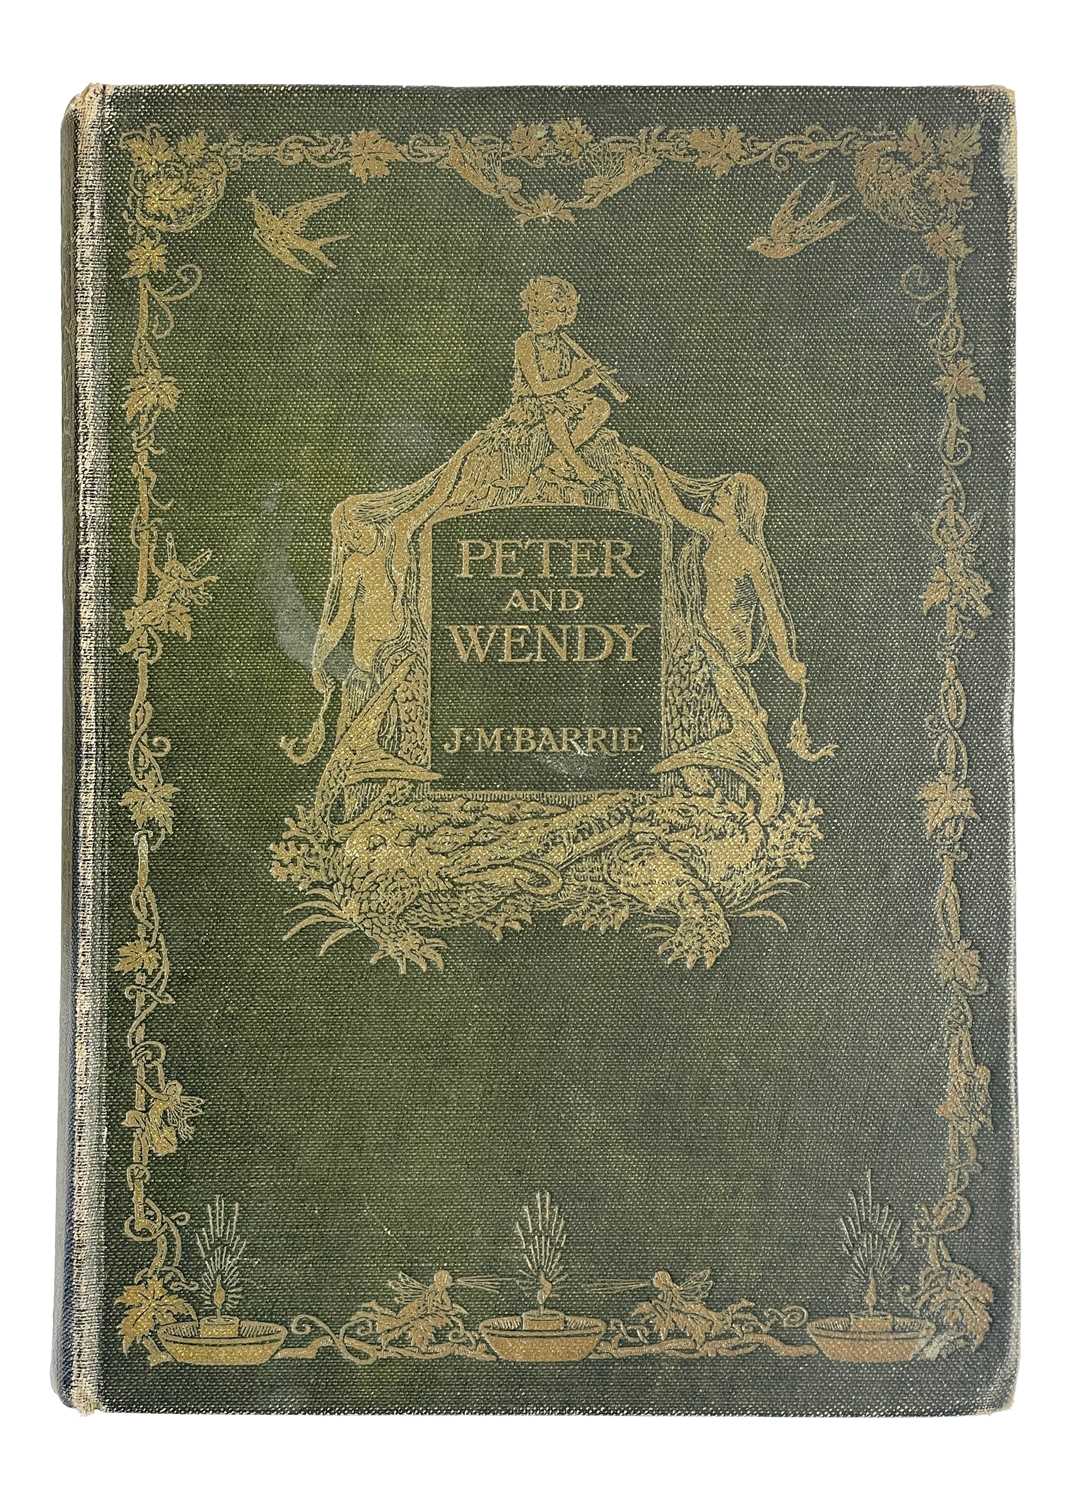 J. M. Barrie 'Peter and Wendy,' - Image 10 of 17